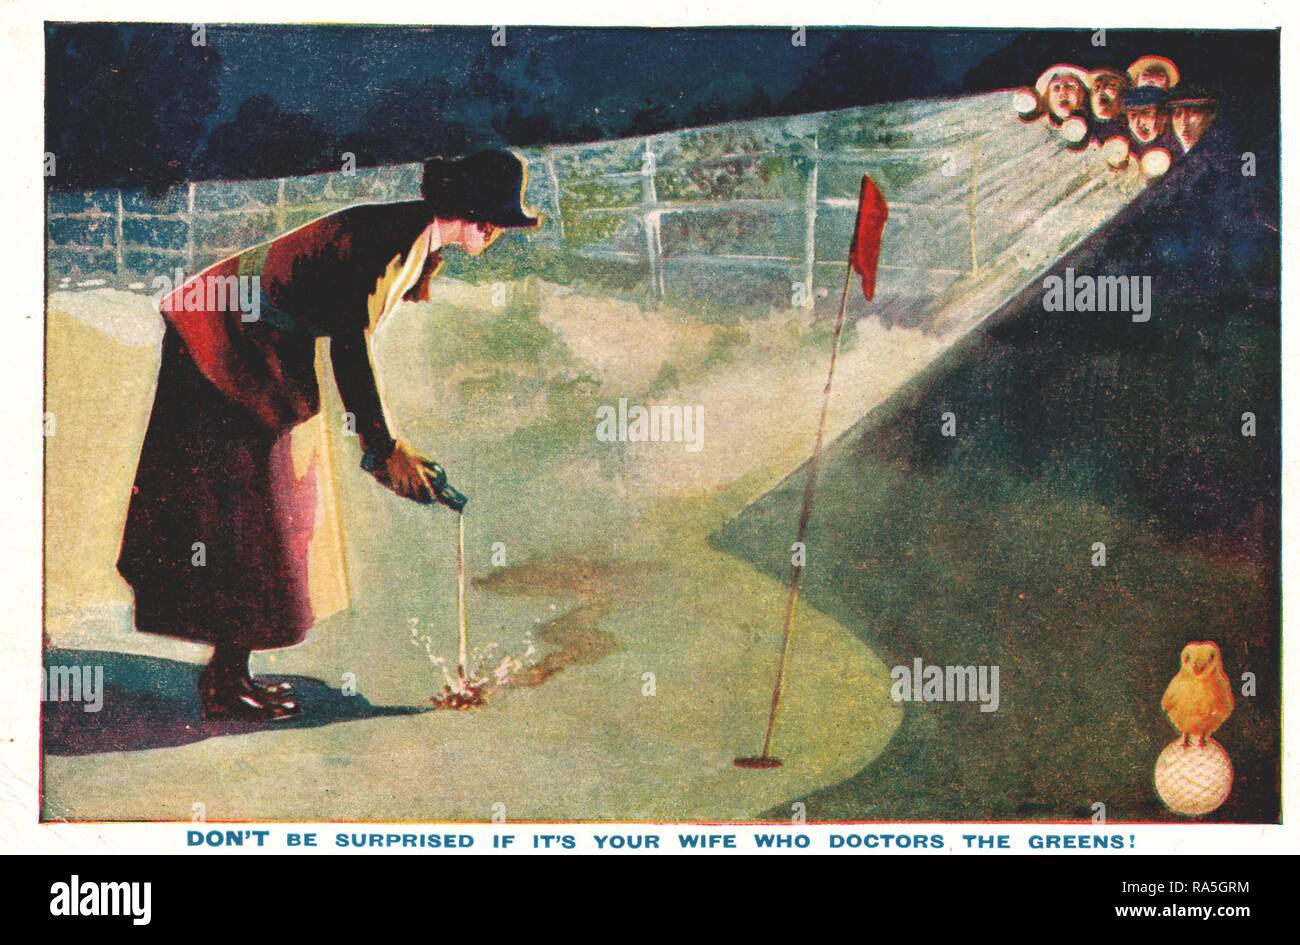 Anti-suffrage, color postcard, depicting a female suffragist, wearing Edwardian clothing, caught in the act of pouring acid on a golf-green, with the text 'Don't be surprised if it's your wife who doctors the greens!' published for the British market, 1900. () Stock Photo